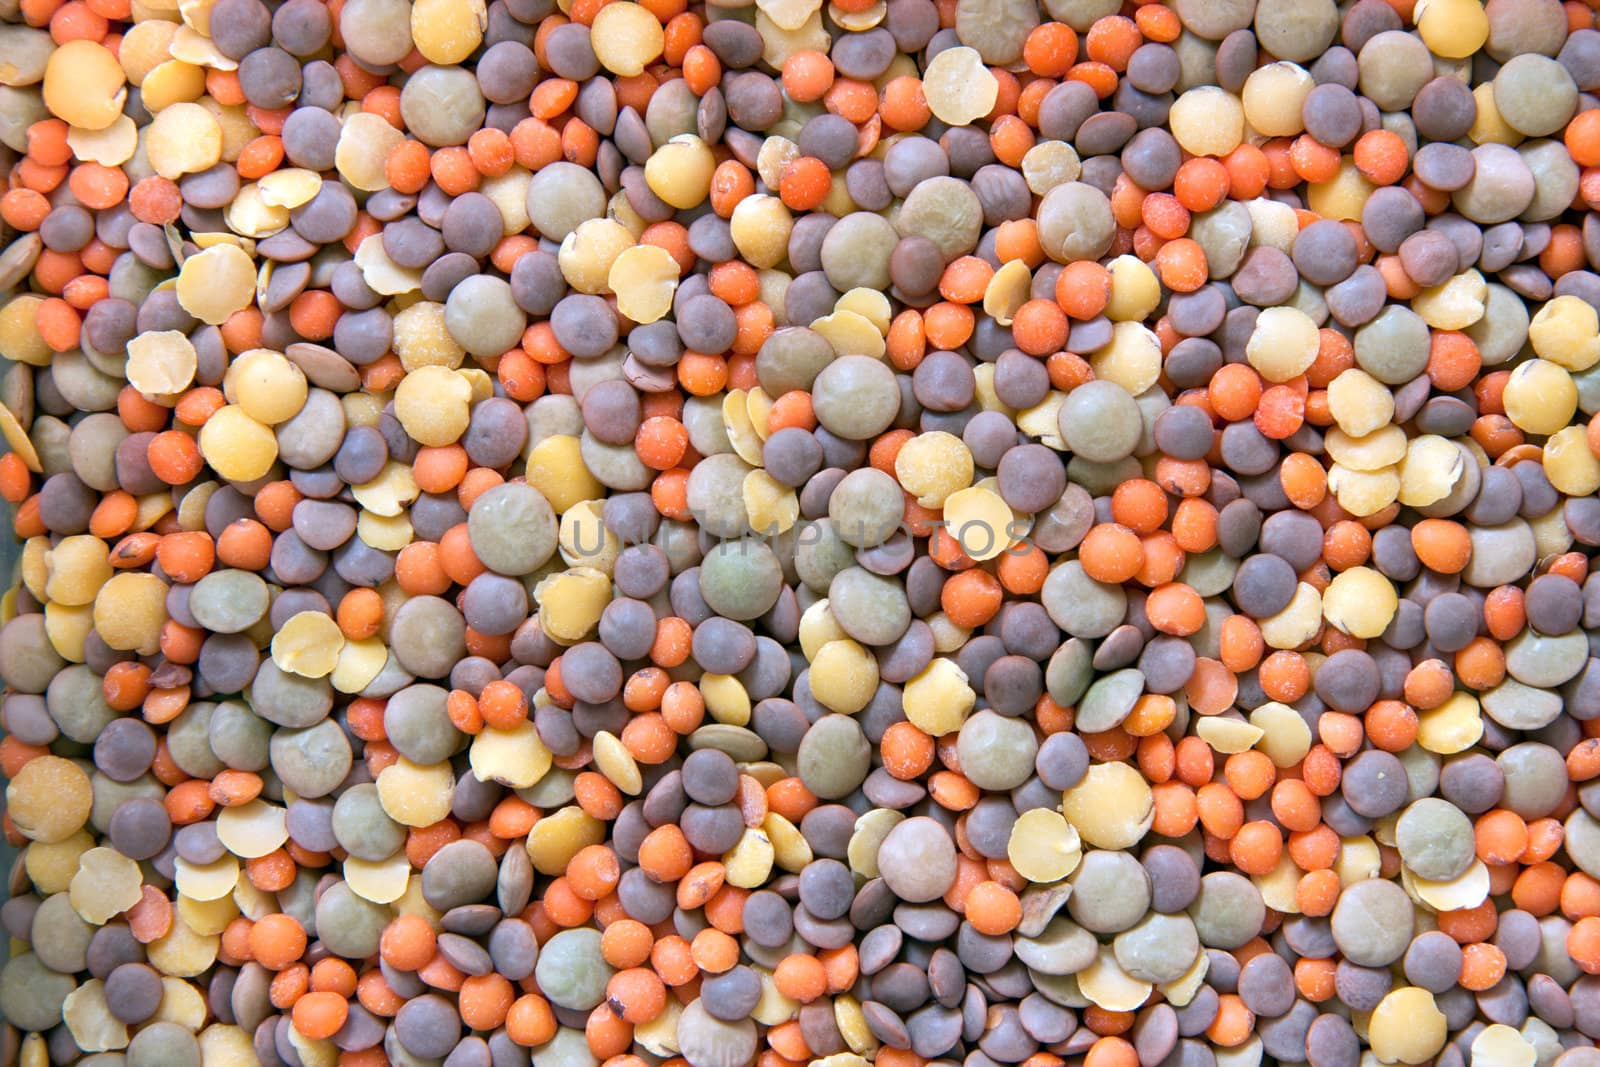 Lentils of the world by raliand